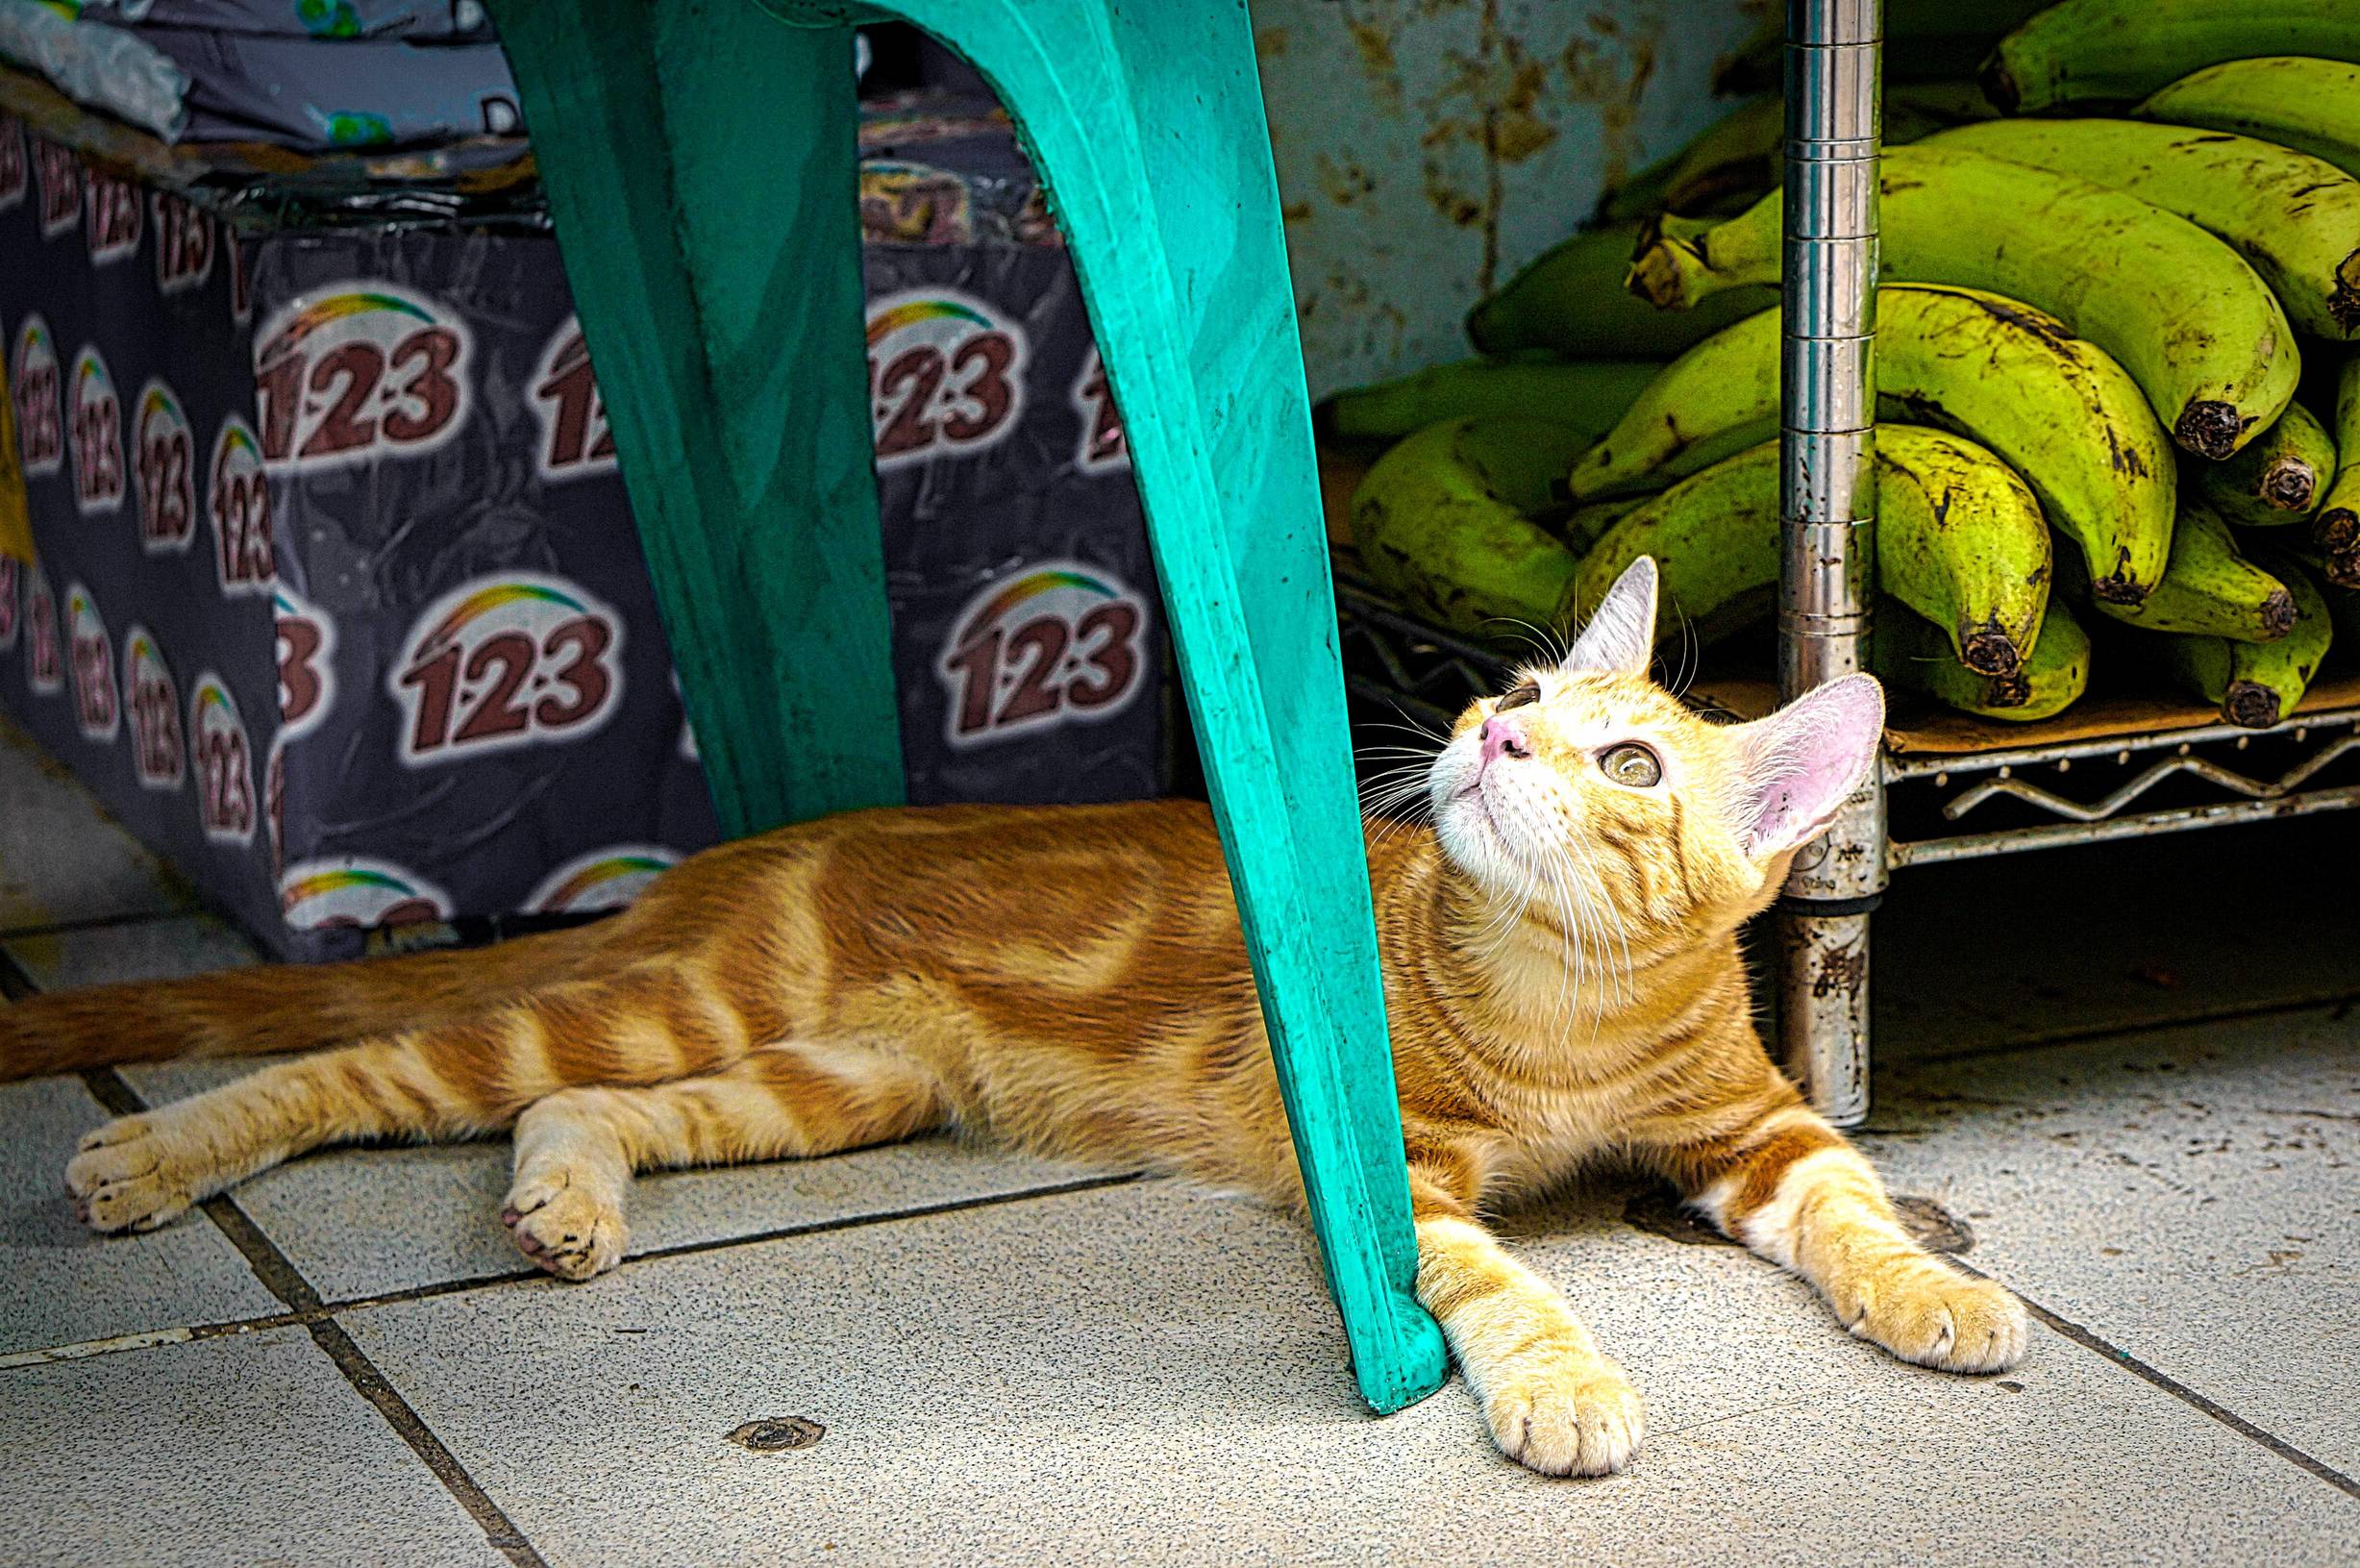 A young kitty getting some shade at the market today